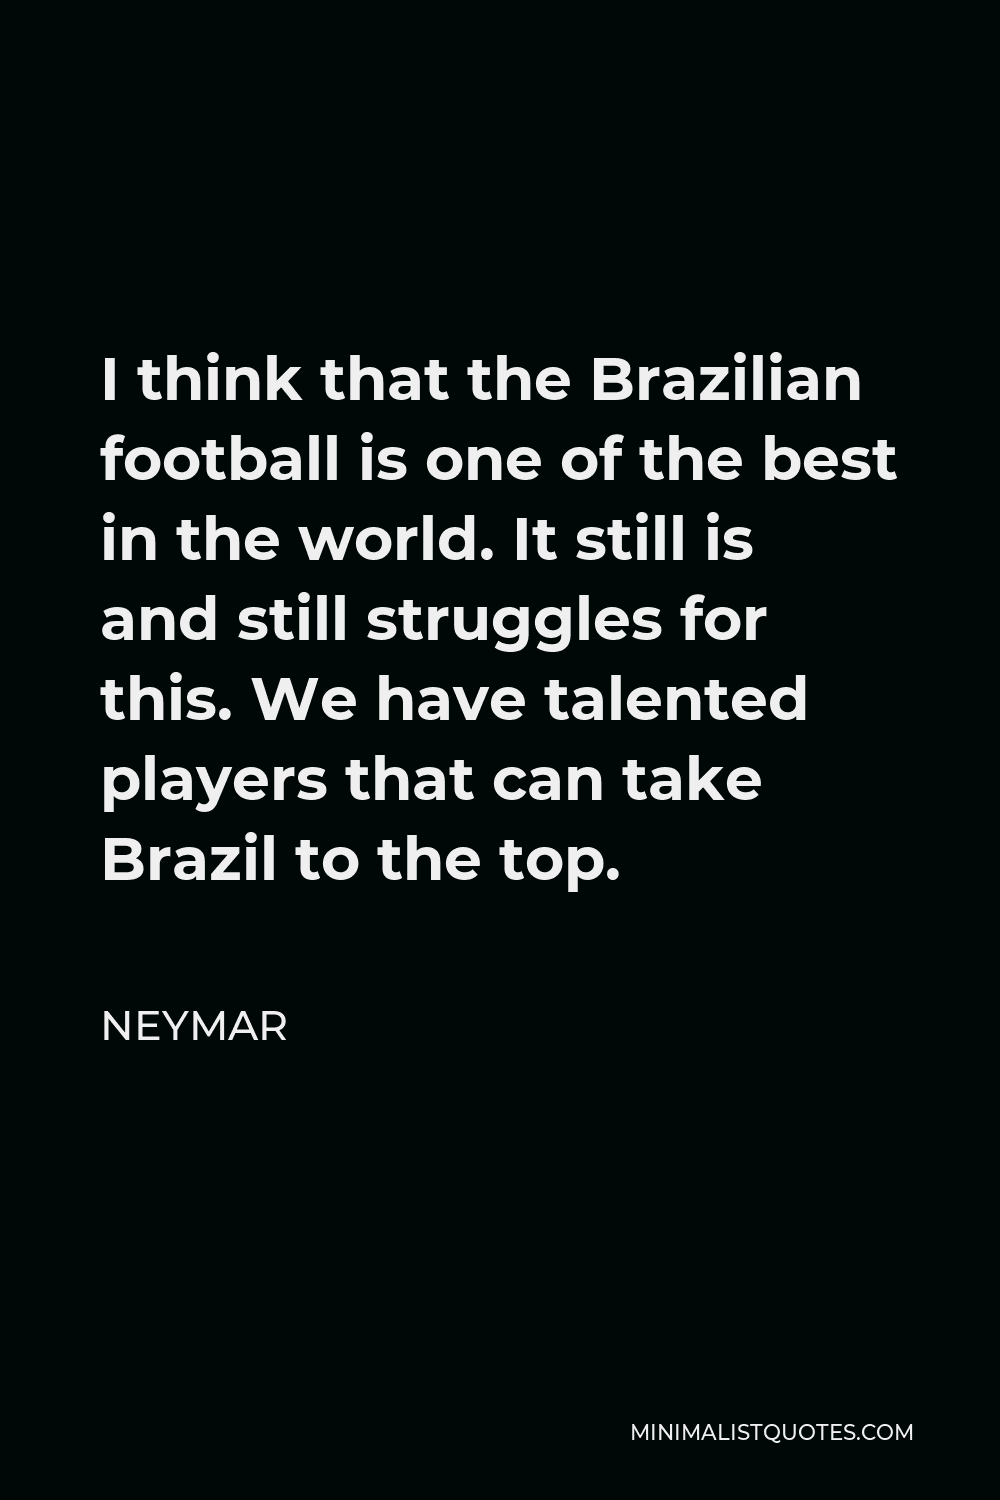 Neymar Quote - I think that the Brazilian football is one of the best in the world. It still is and still struggles for this. We have talented players that can take Brazil to the top.